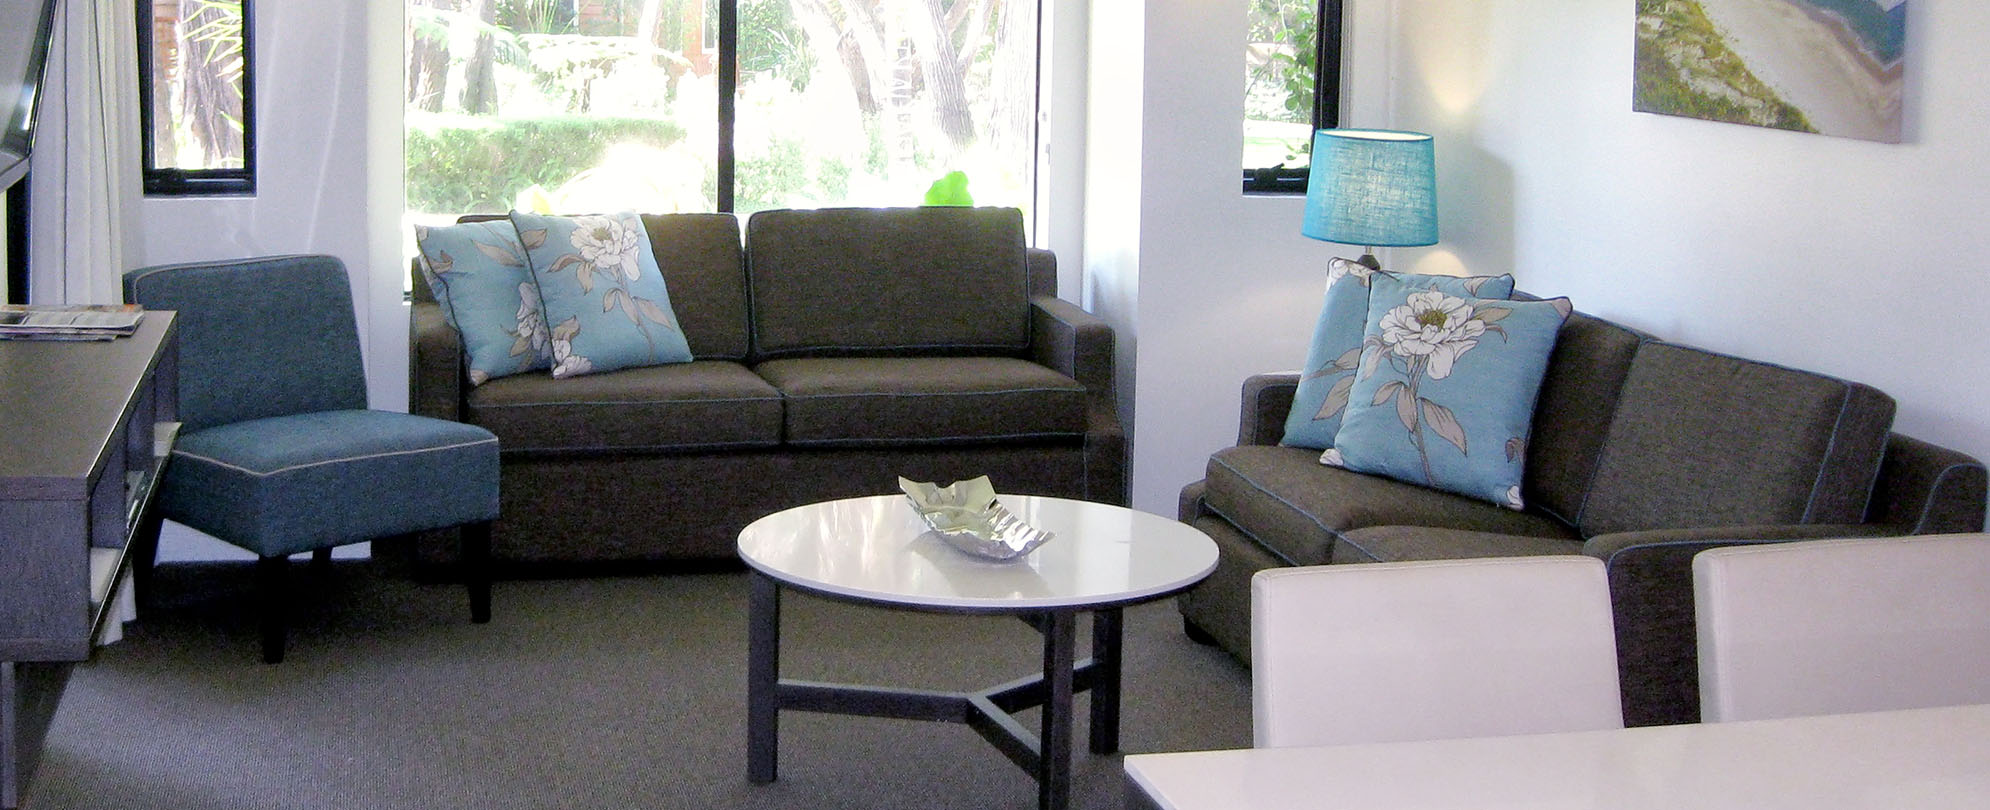 The living room of a 2-bedroom deluxe suite at Club Wyndham Dunsborough.